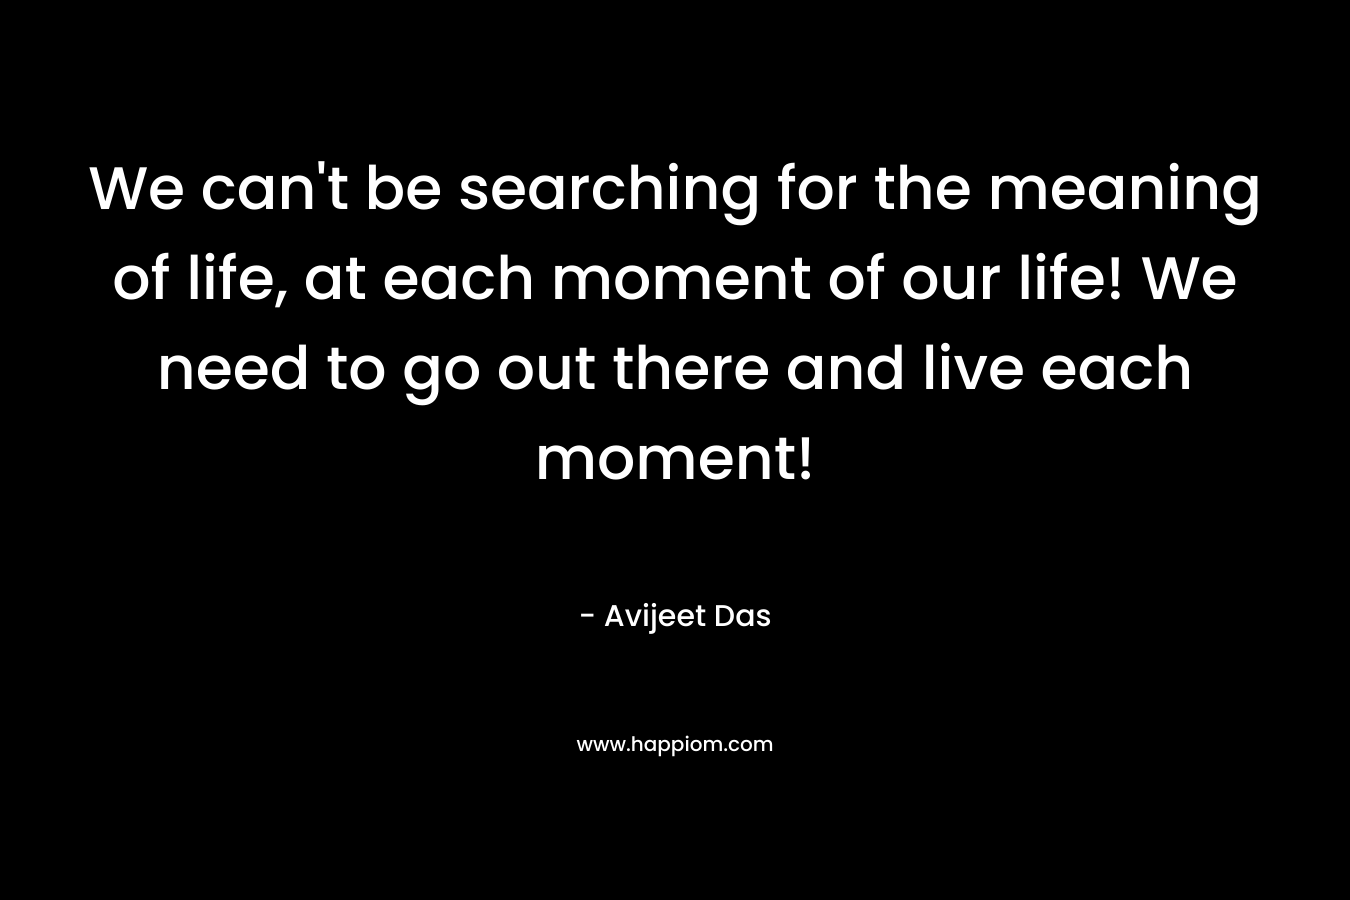 We can't be searching for the meaning of life, at each moment of our life! We need to go out there and live each moment!